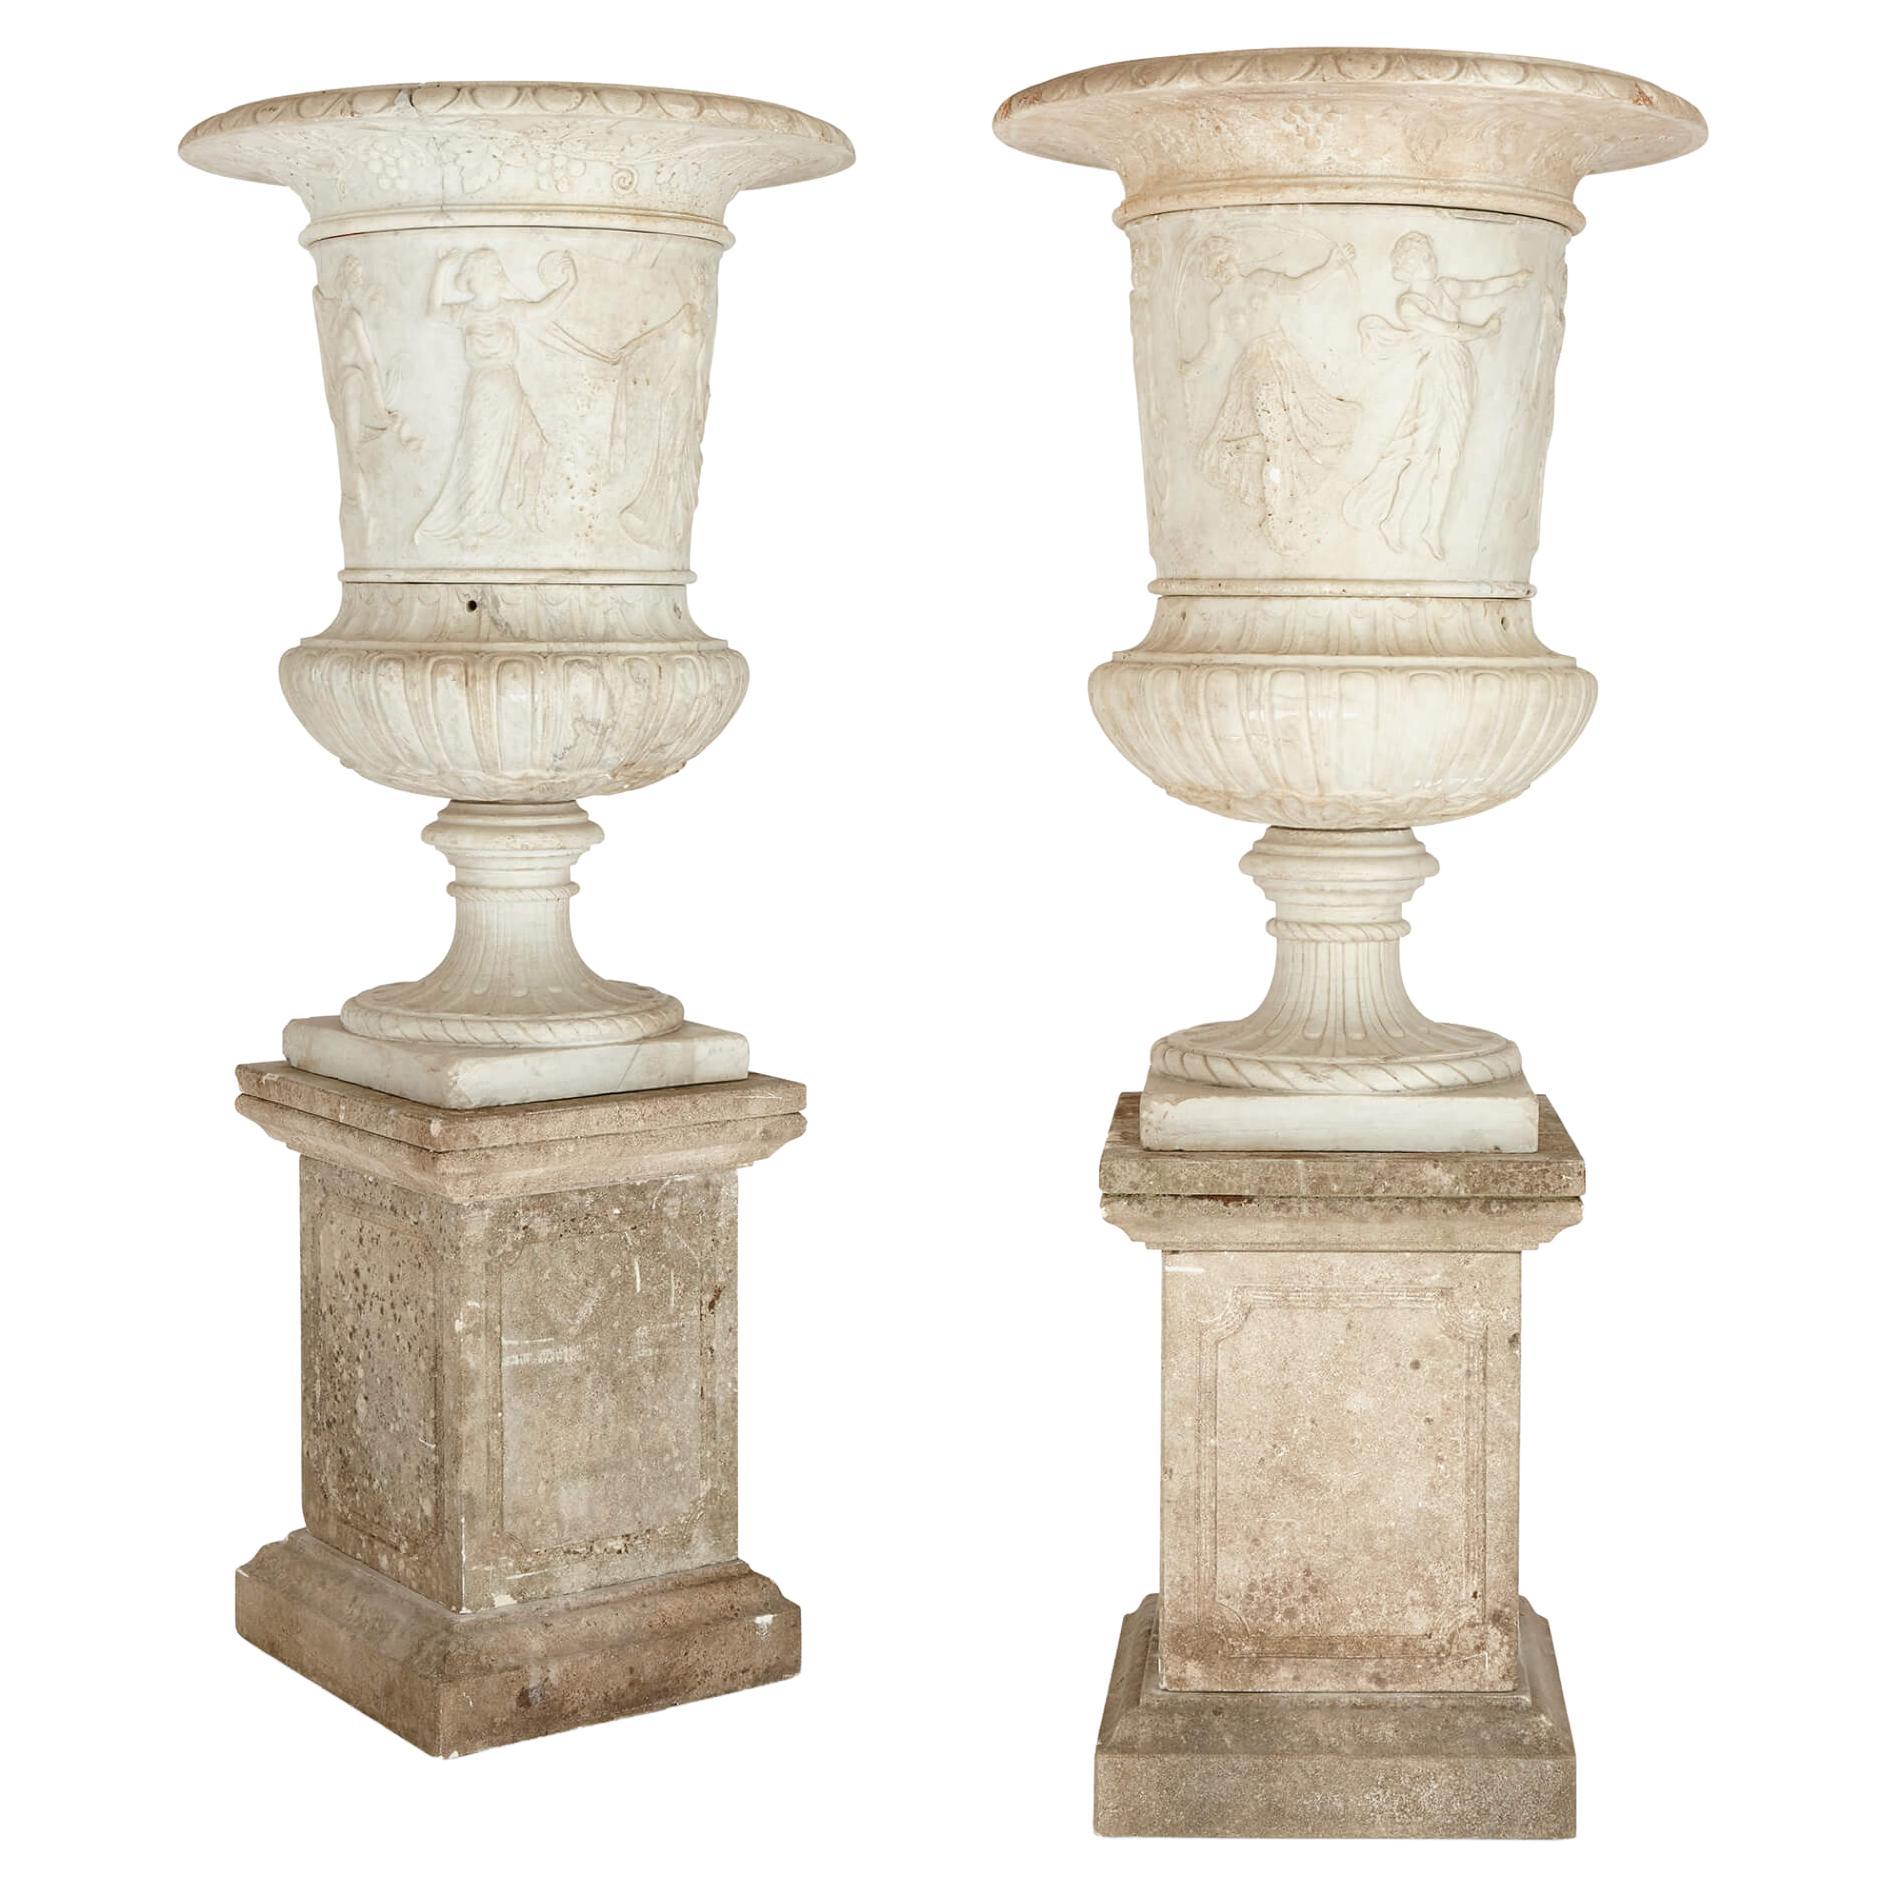 Pair of Large, Very Fine Carved Marble Garden Urns of Campana Form with Plinths